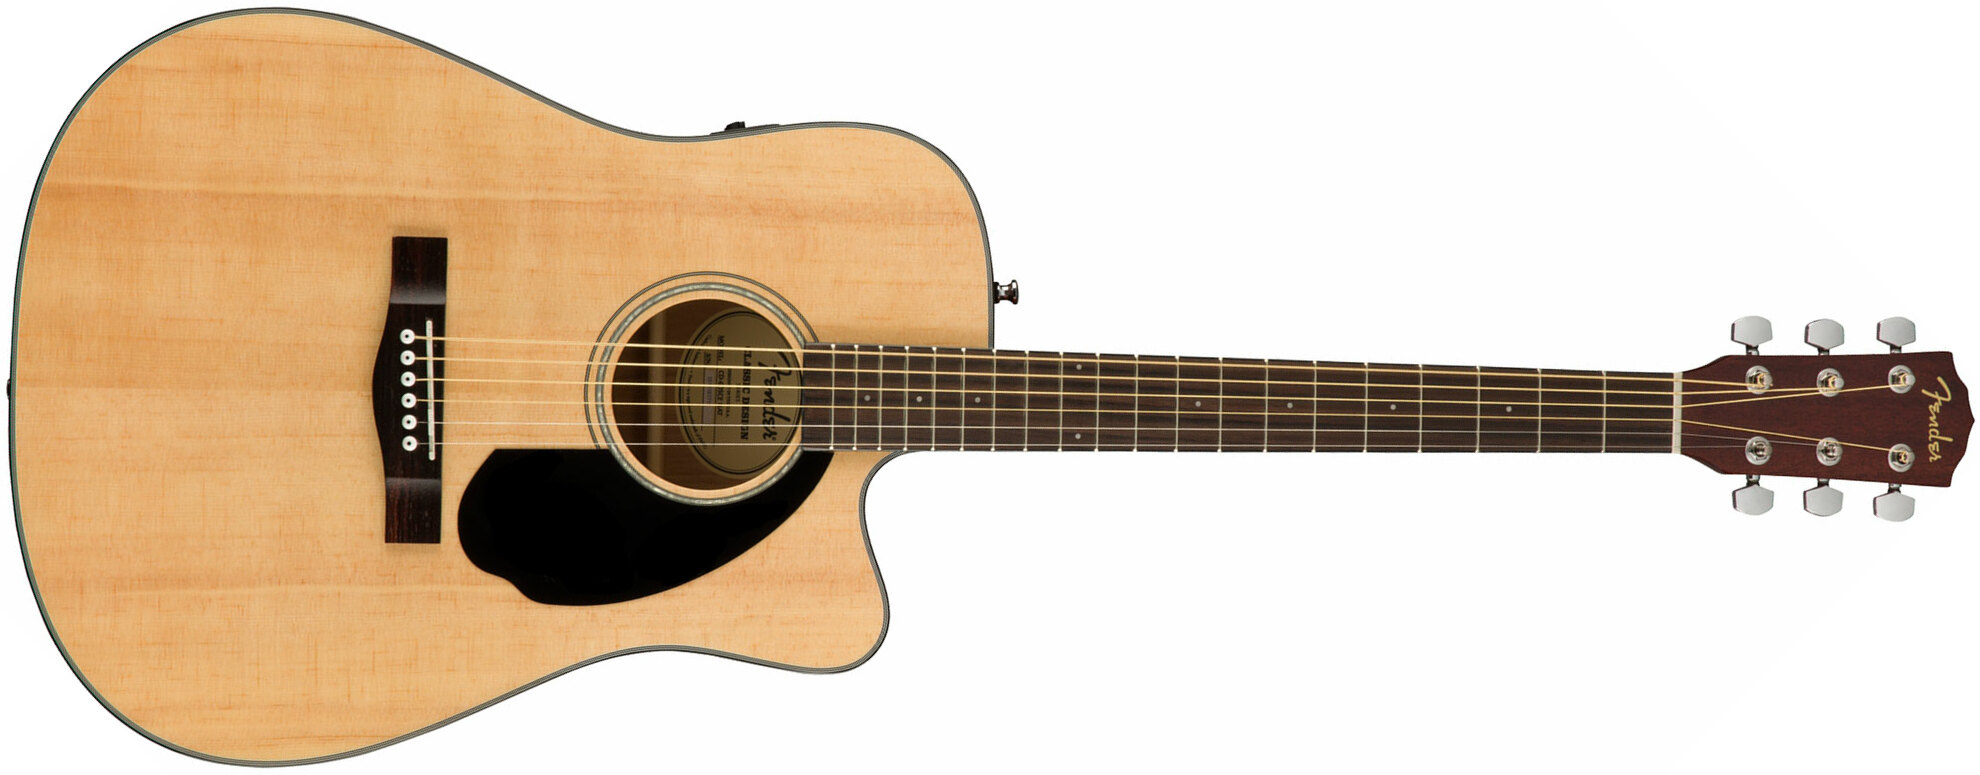 Fender Cd-60sce Dreadnought Cw Epicea Acajou Wal - Natural - Electro acoustic guitar - Main picture